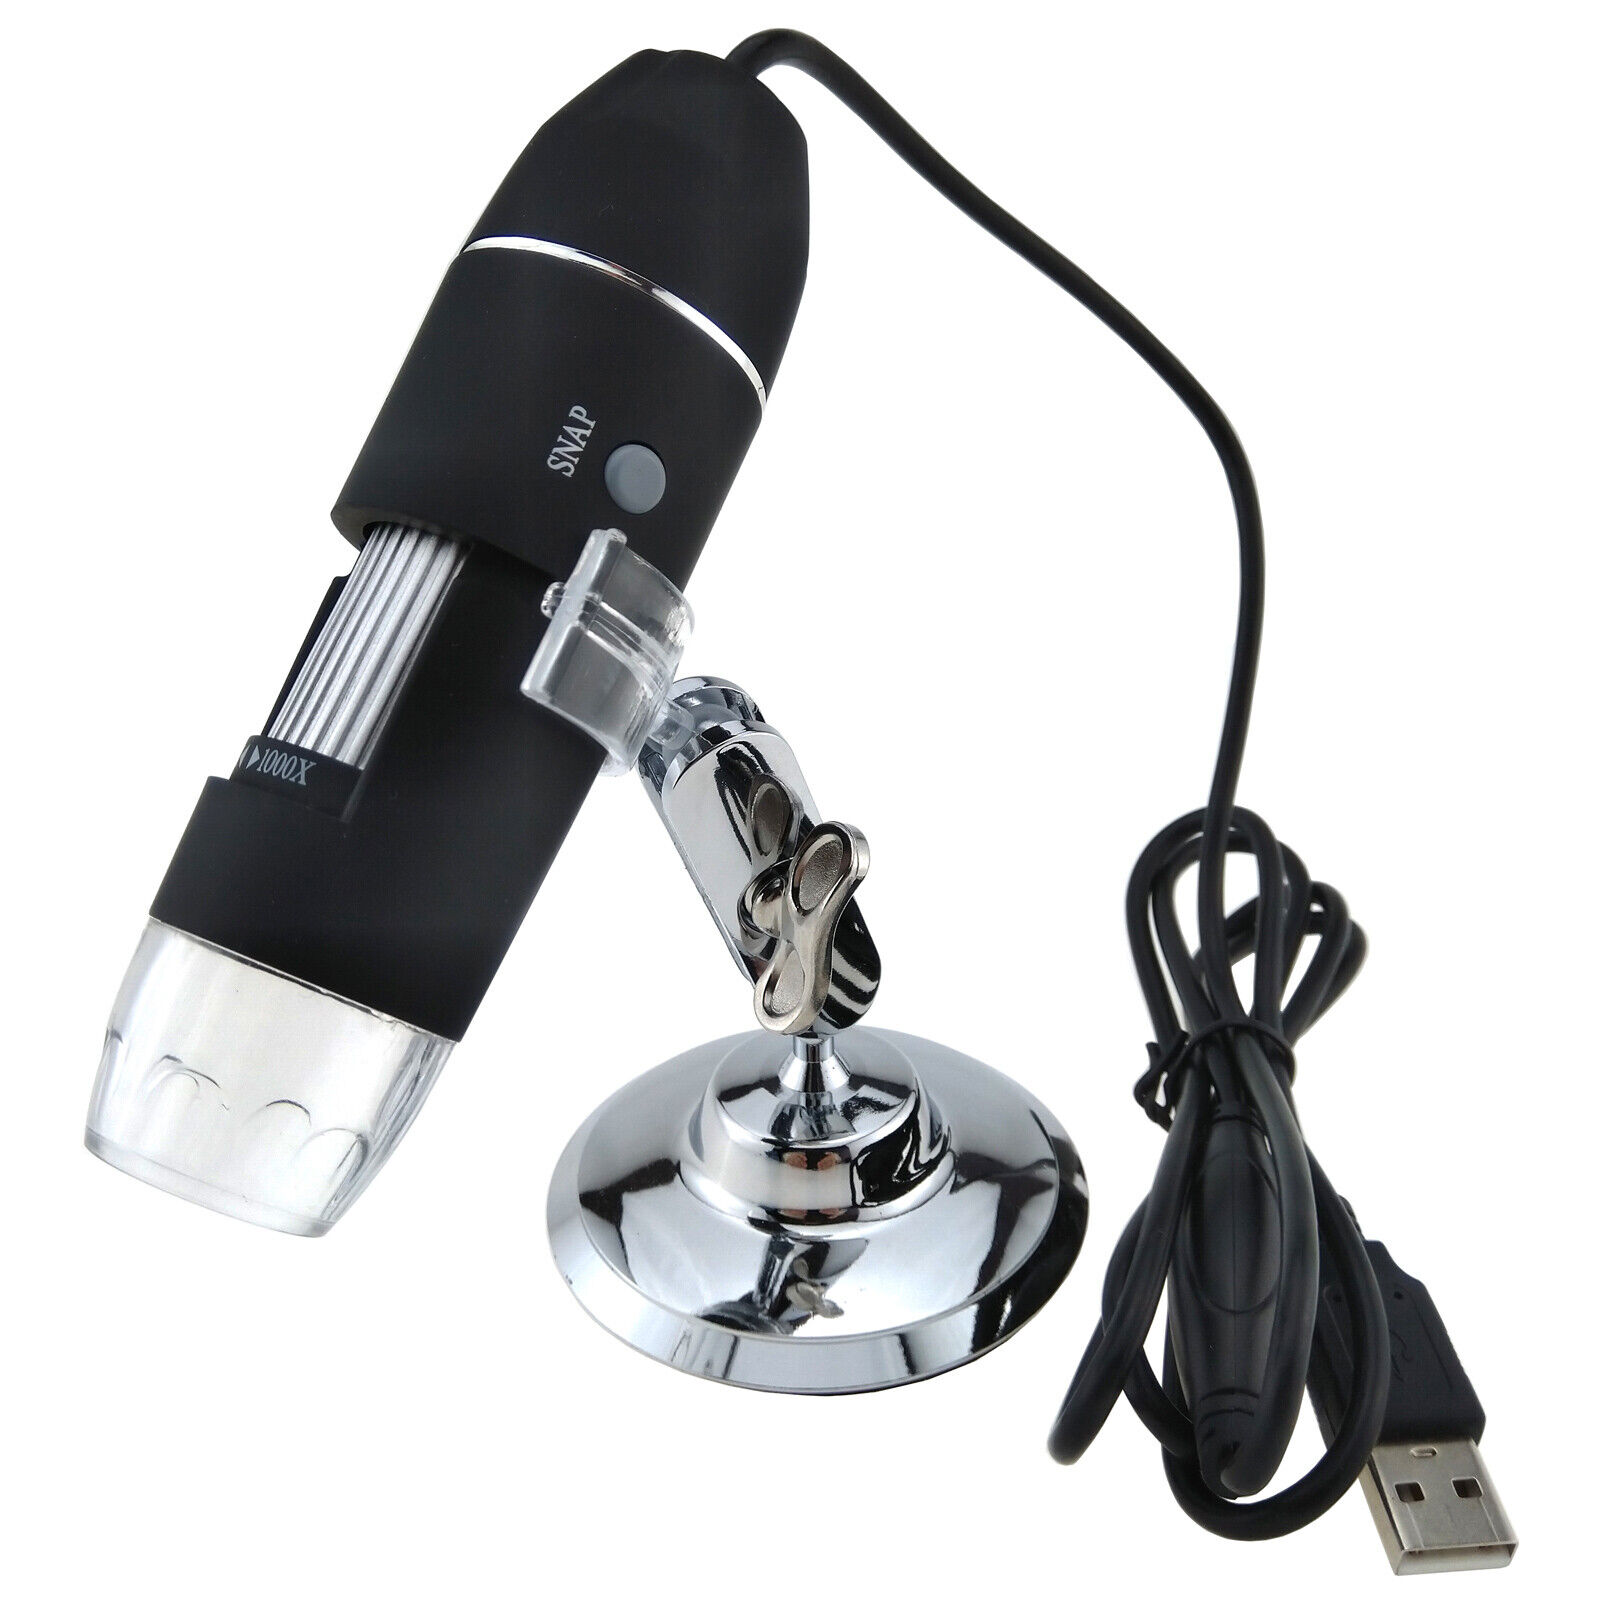 USB Microscope 1000X Magnifier Digital Video Capture Zoom Android Phone Adapter